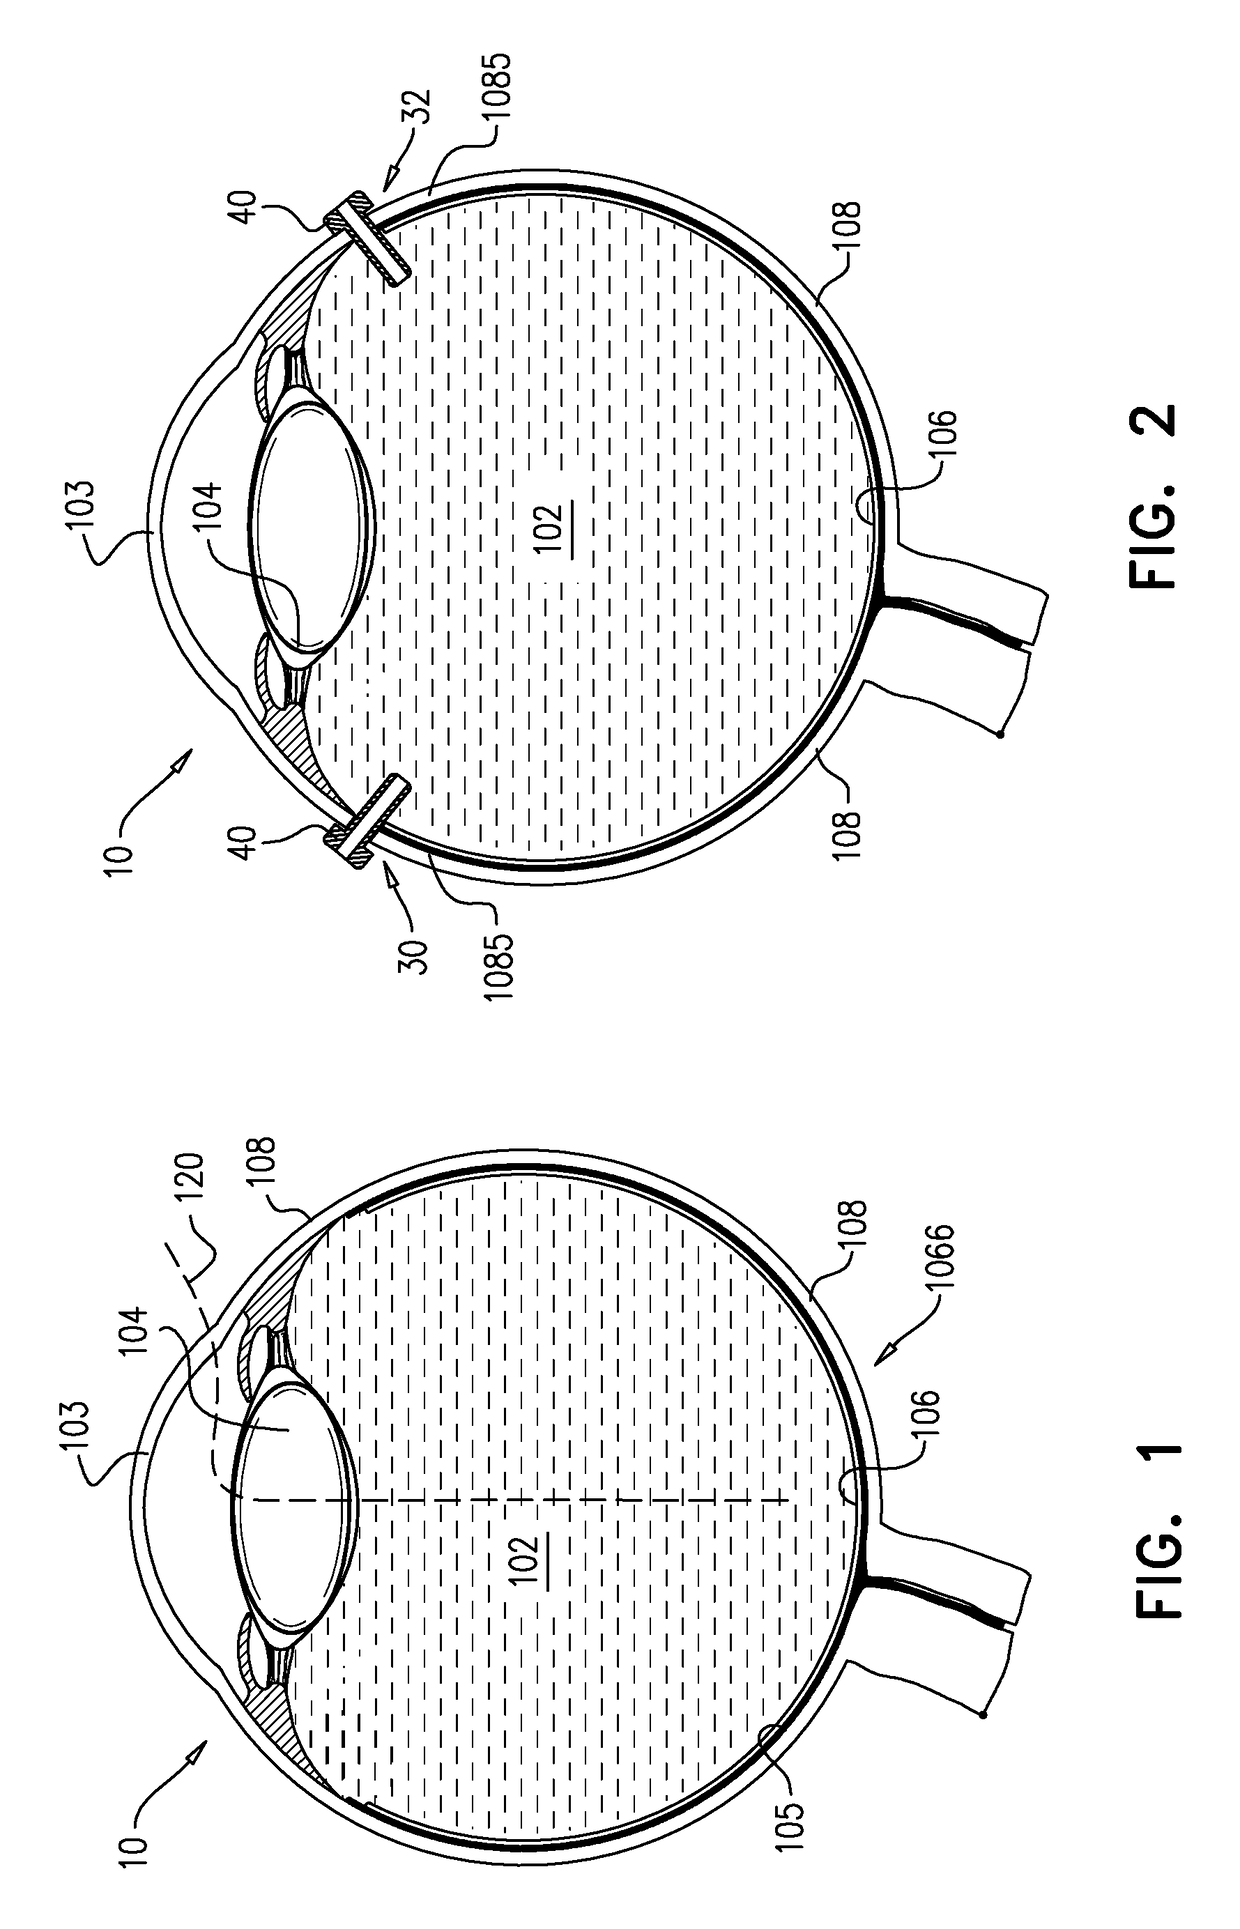 Surgical techniques for implantation of a retinal implant